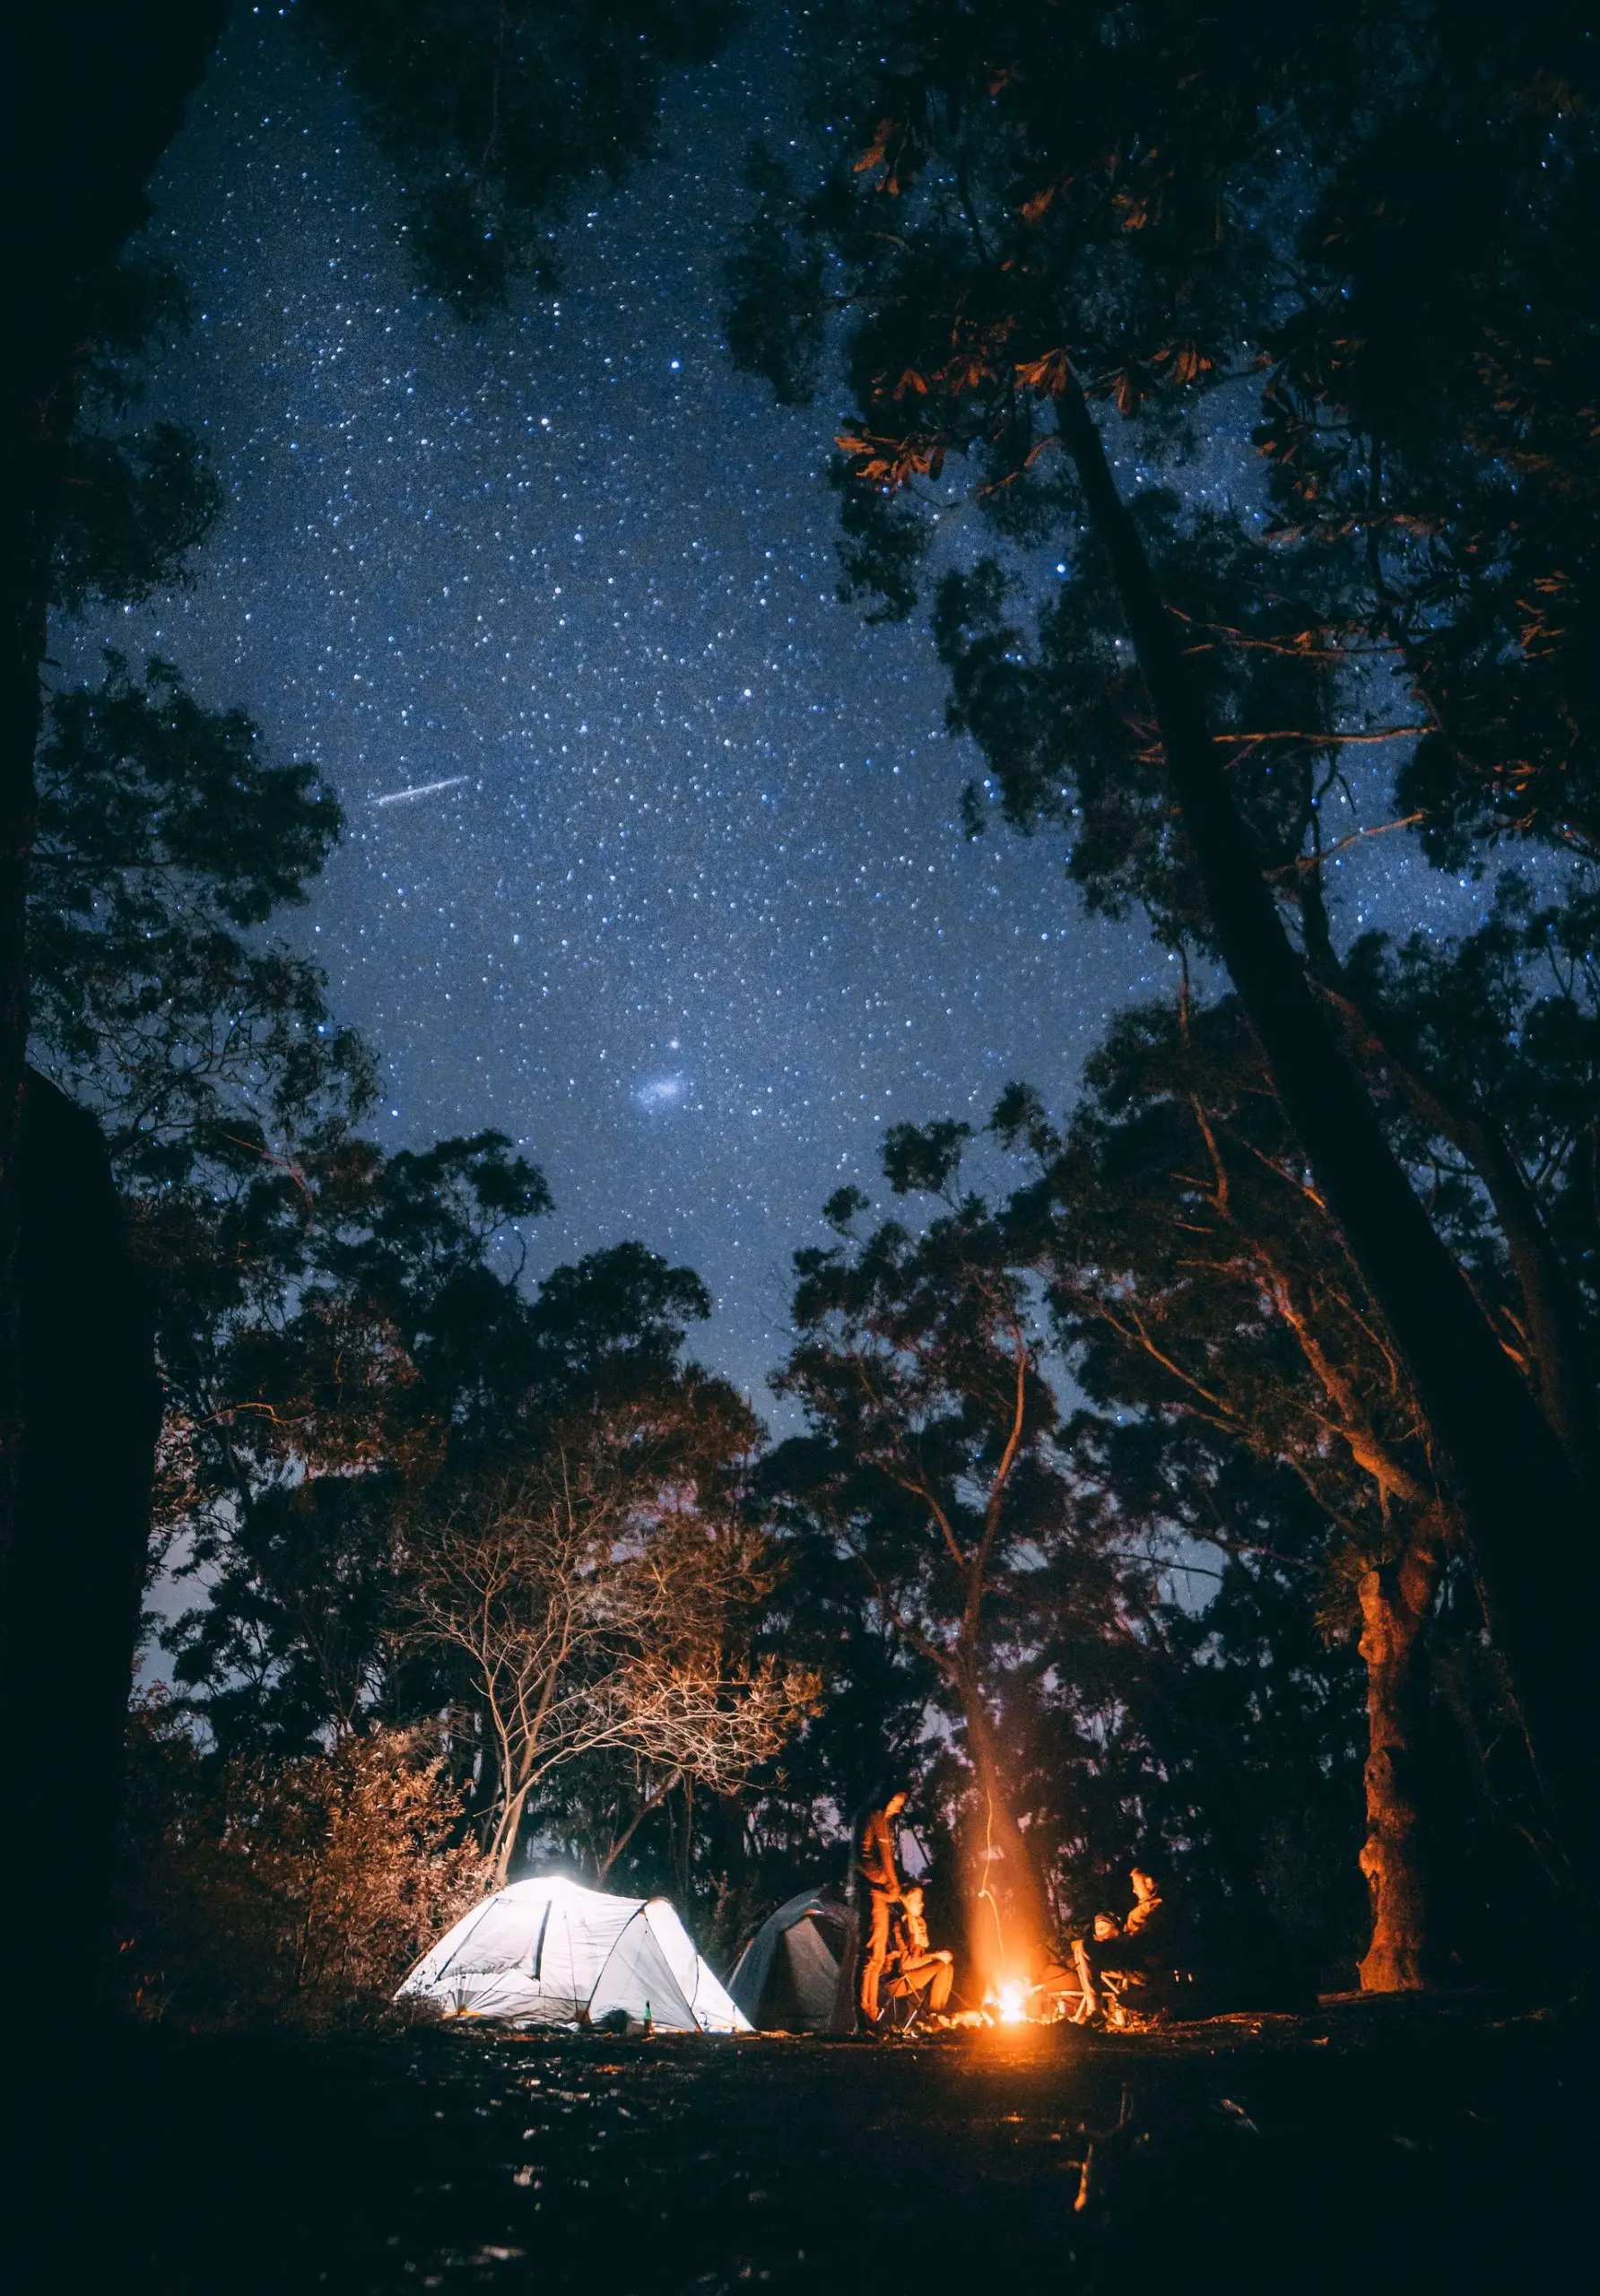 evening sky over a tent at night